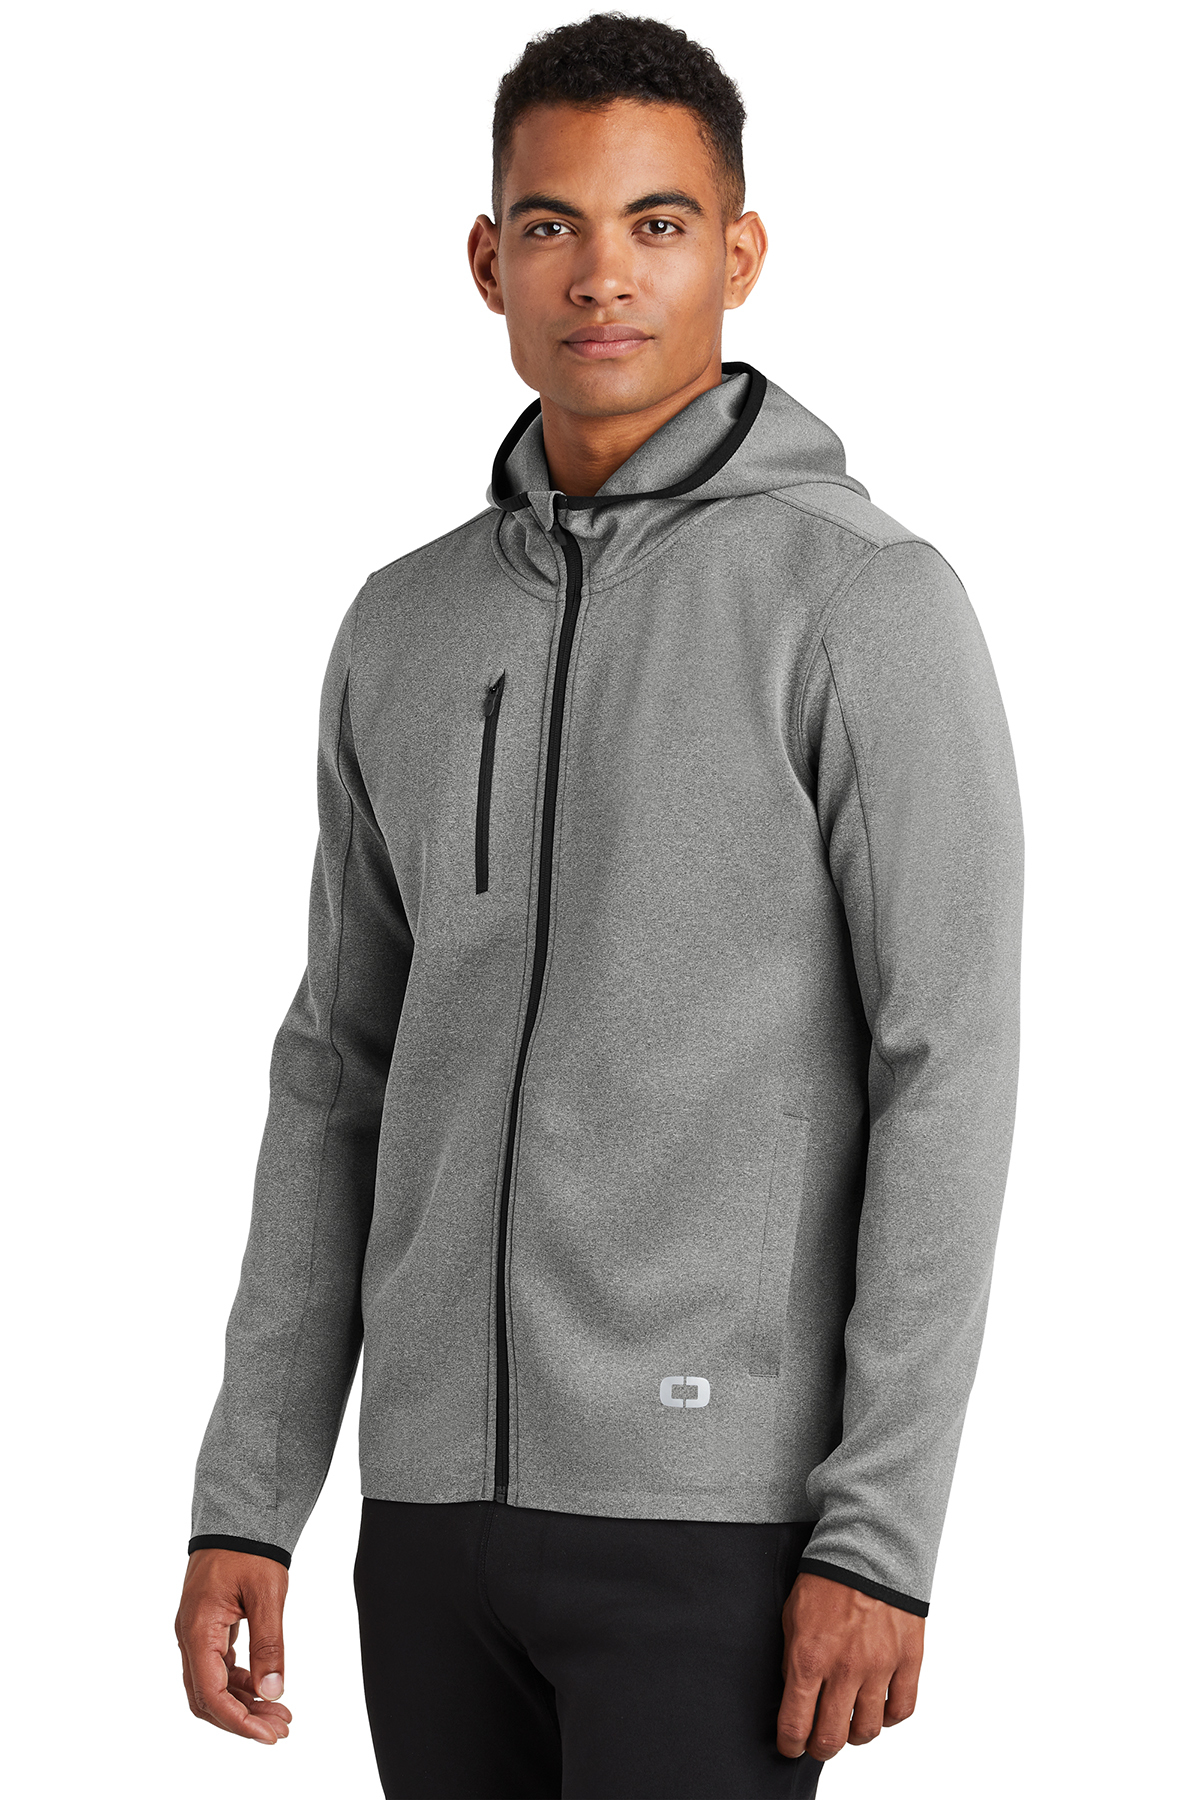 OGIO ® ENDURANCE Stealth Full-Zip Jacket | Outerwear | Company Casuals